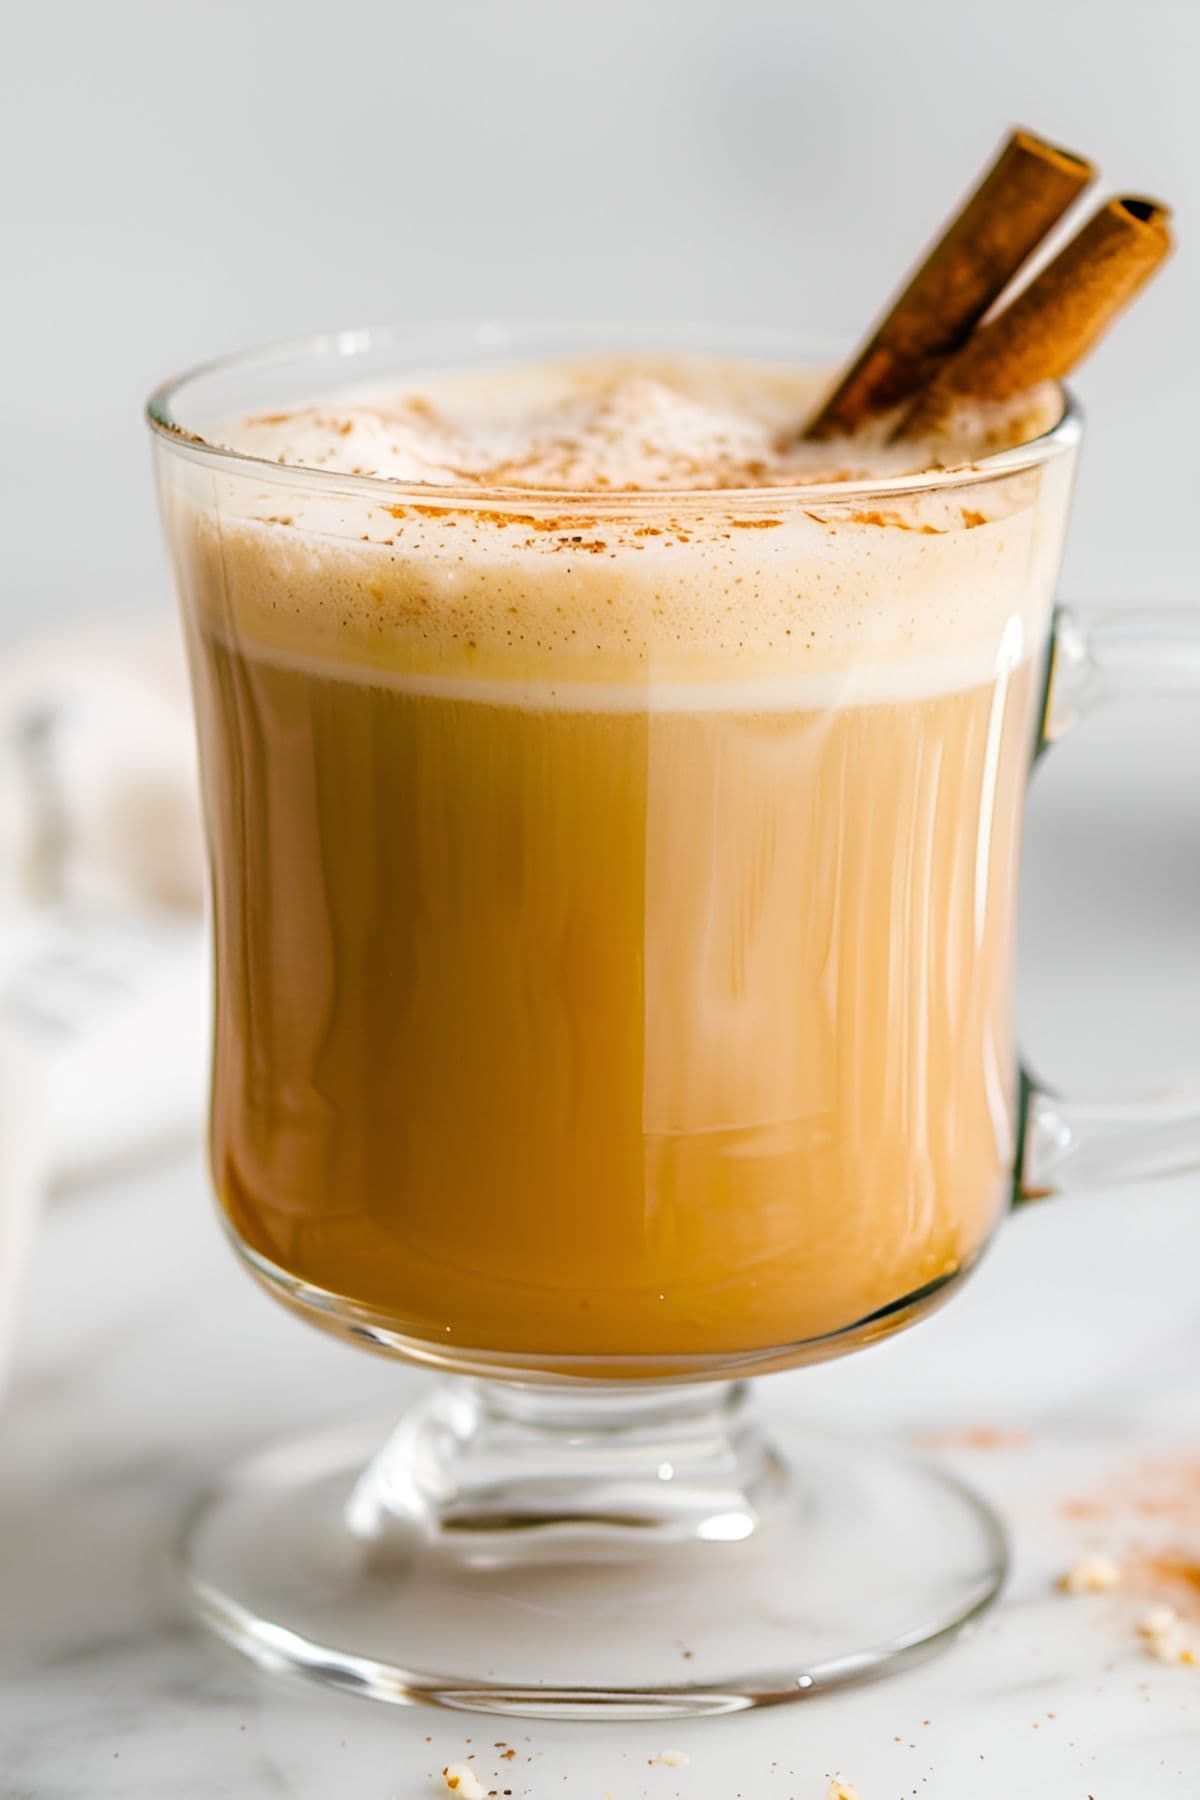 Close Up of Hot Buttered Rum in a Glass with a Foamy Top, Cinnamon Powder, and Two Cinnamon Sticks for Garnish